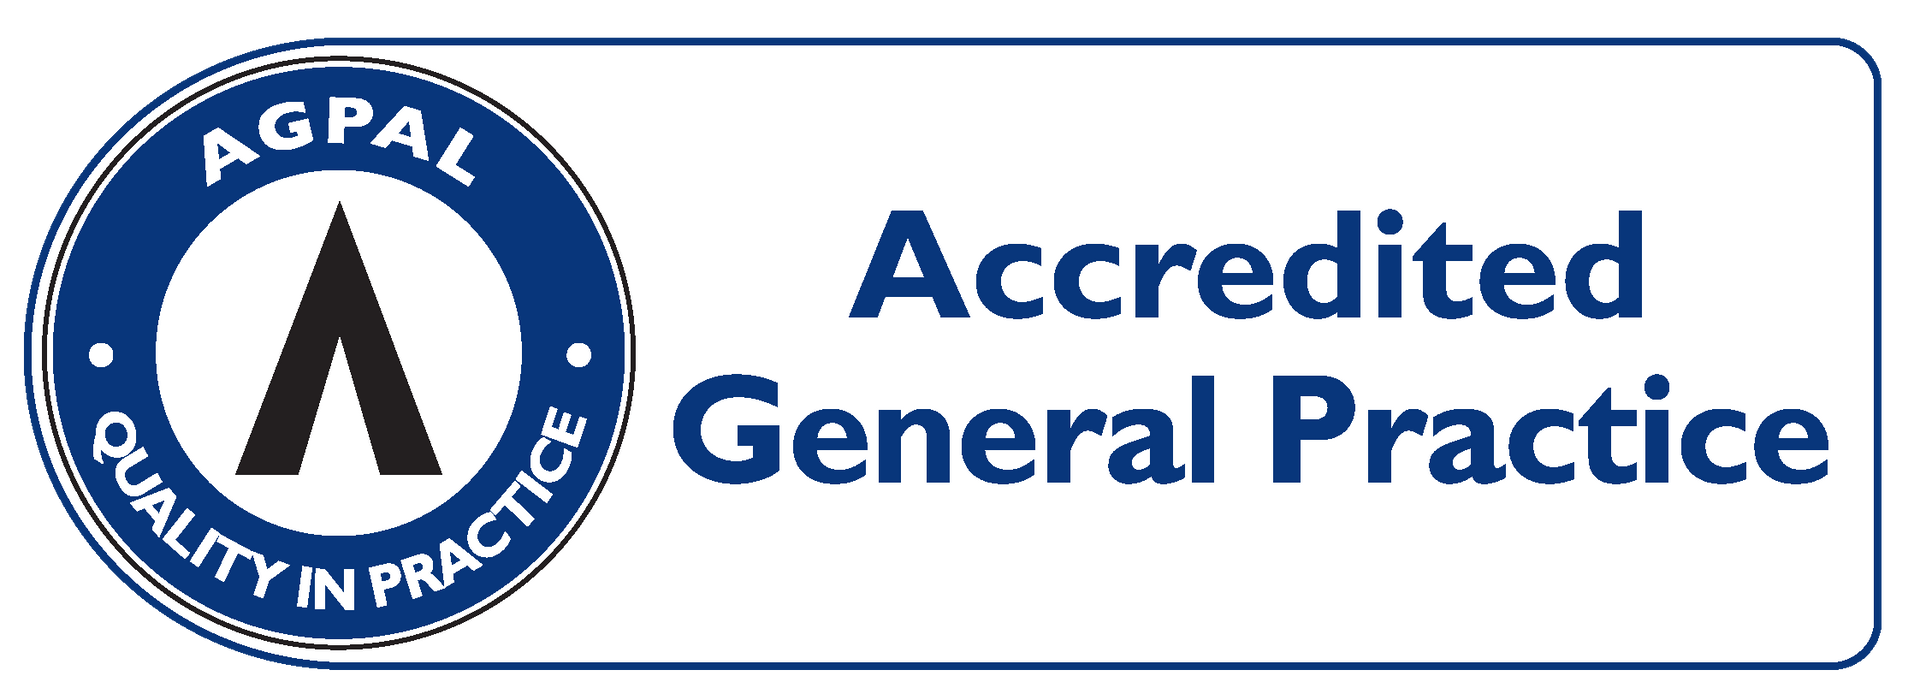 Accredited General Practice Badge